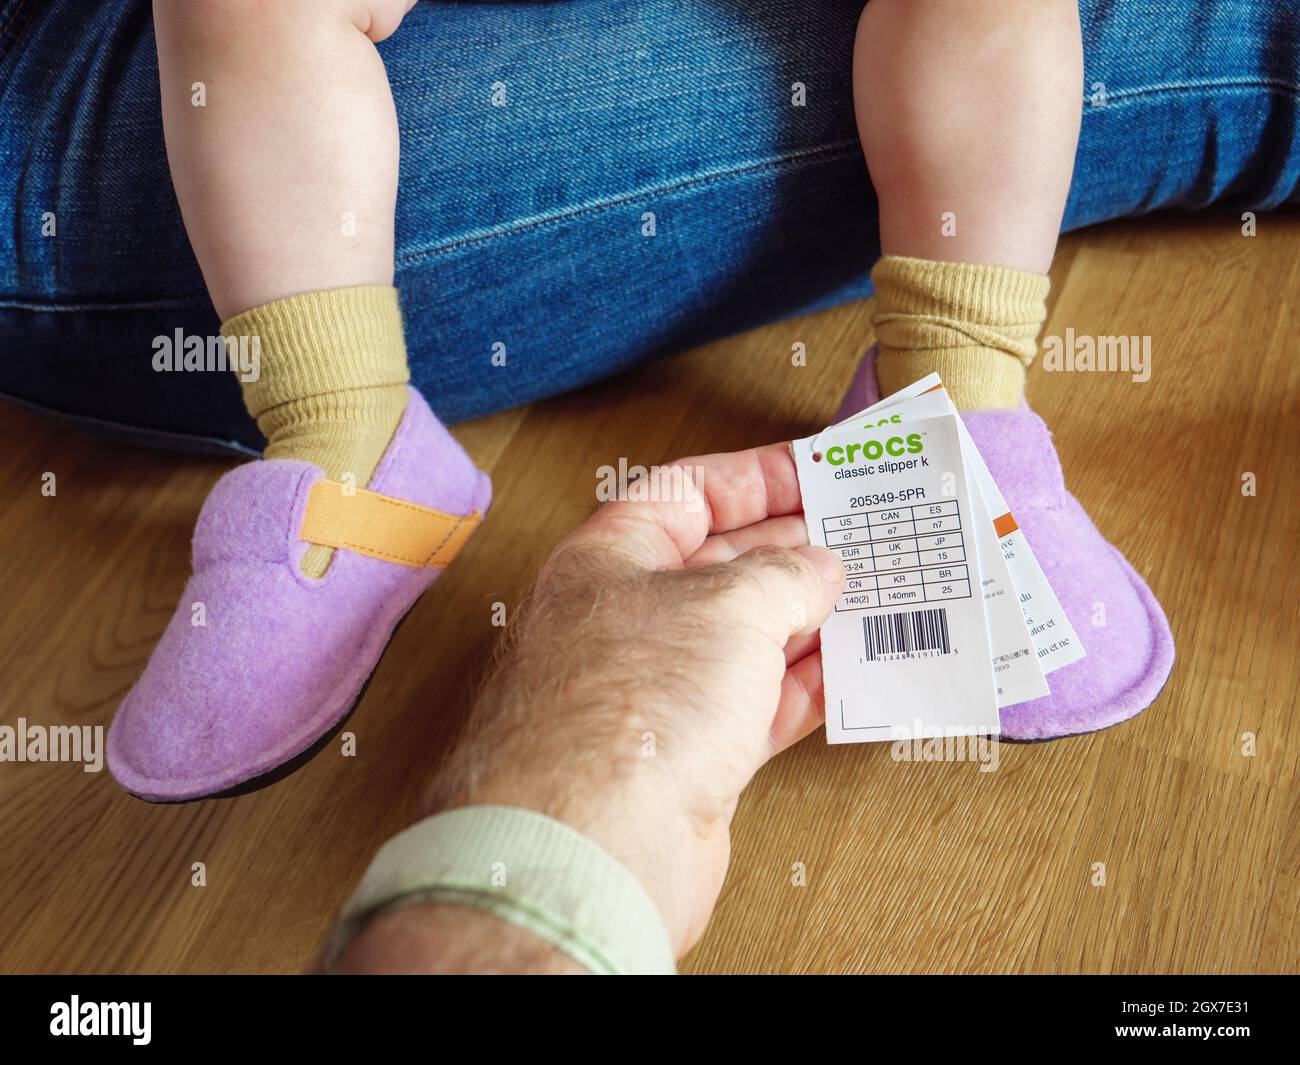 Man hand holding price tag and size tag of Crocs shoes for babies Stock  Photo - Alamy